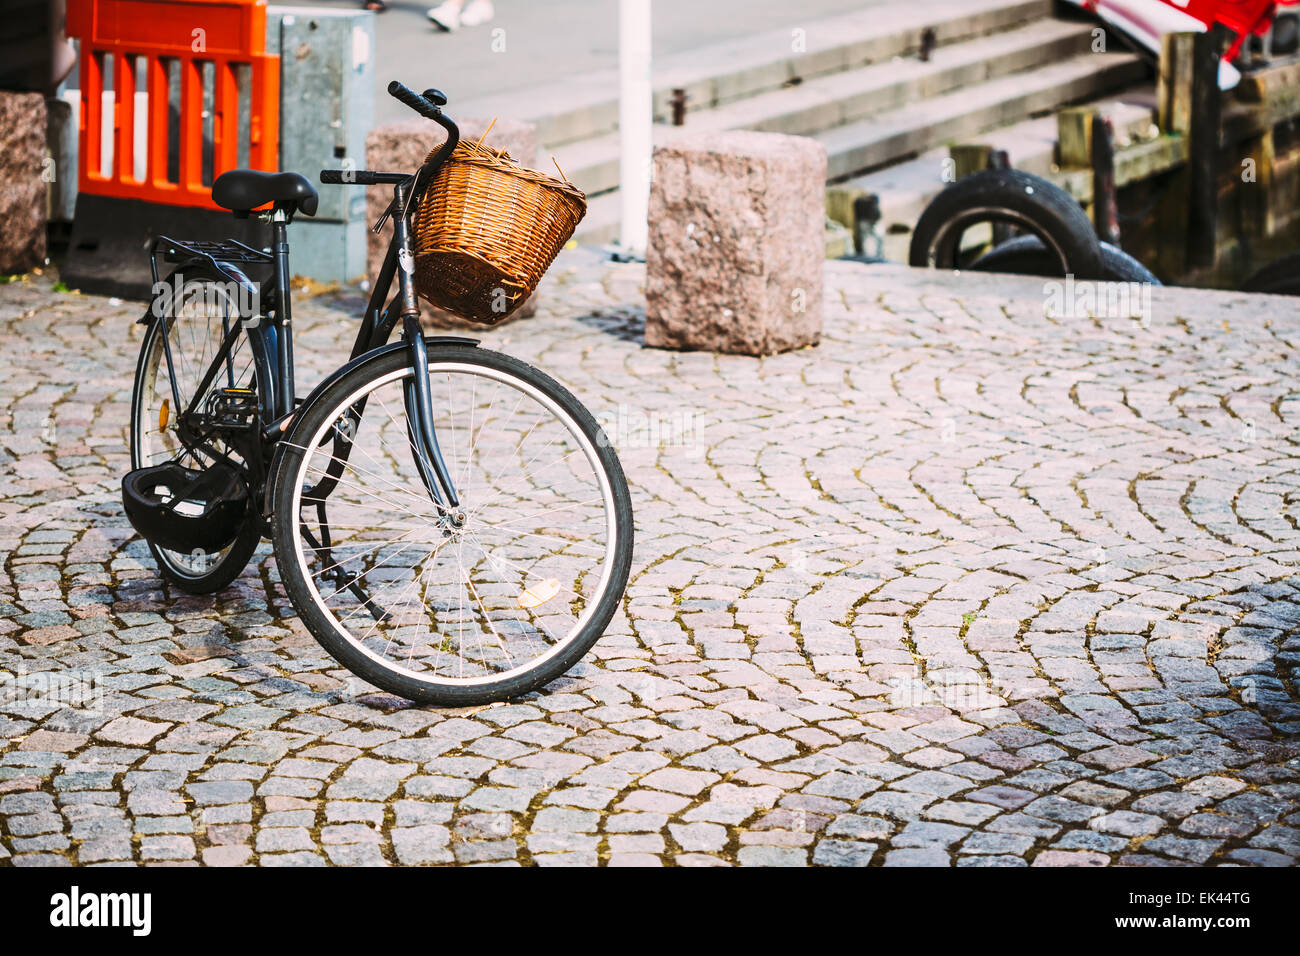 Parked Black Bicycle With Basket On Sidewalk. Bike Parking In European City. Toned Instant Filtered Photo Stock Photo